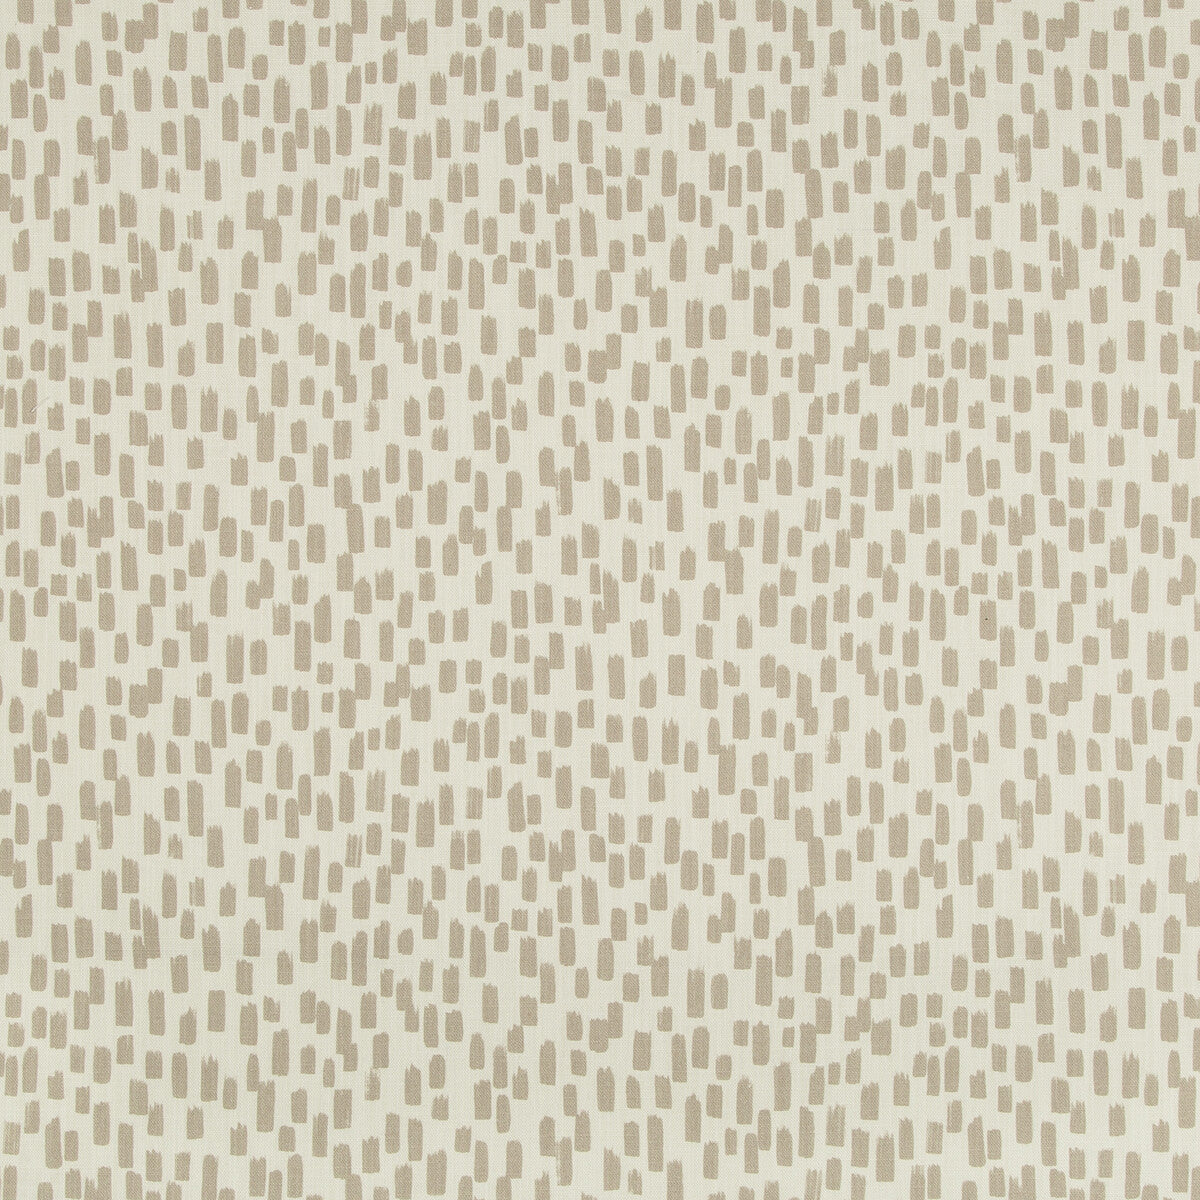 Inkstrokes fabric in sand color - pattern INKSTROKES.16.0 - by Kravet Basics in the Nate Berkus Well-Traveled collection